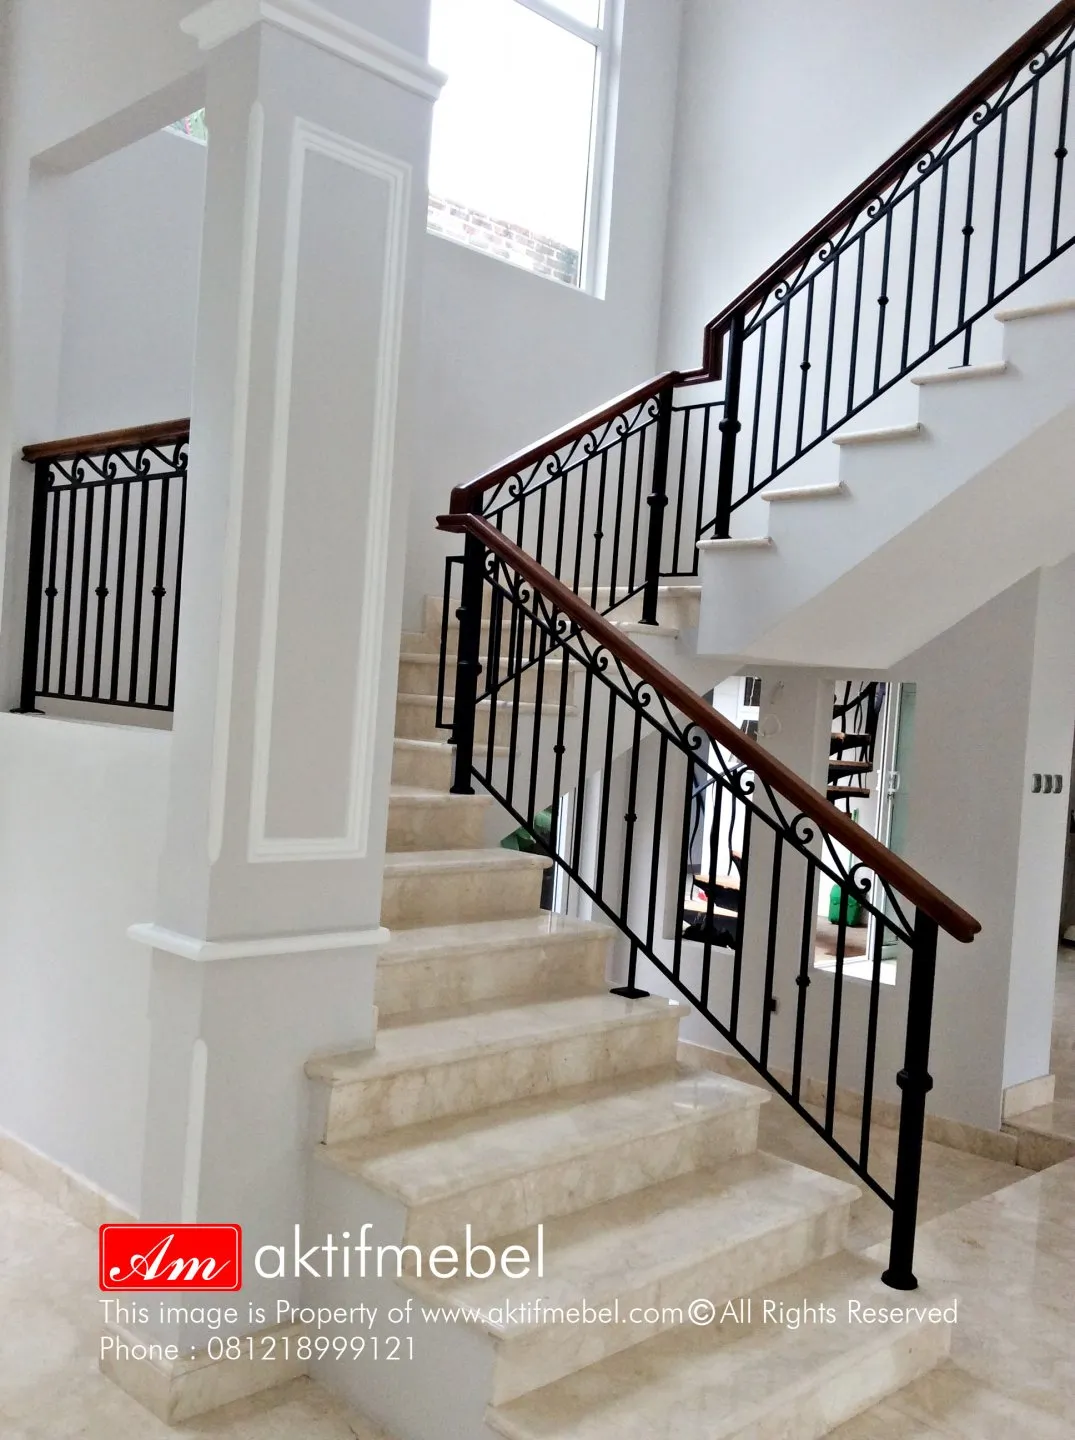 Completed Projects Railing Tangga Cinere - Residential Architecture 6 railing_cinere_6